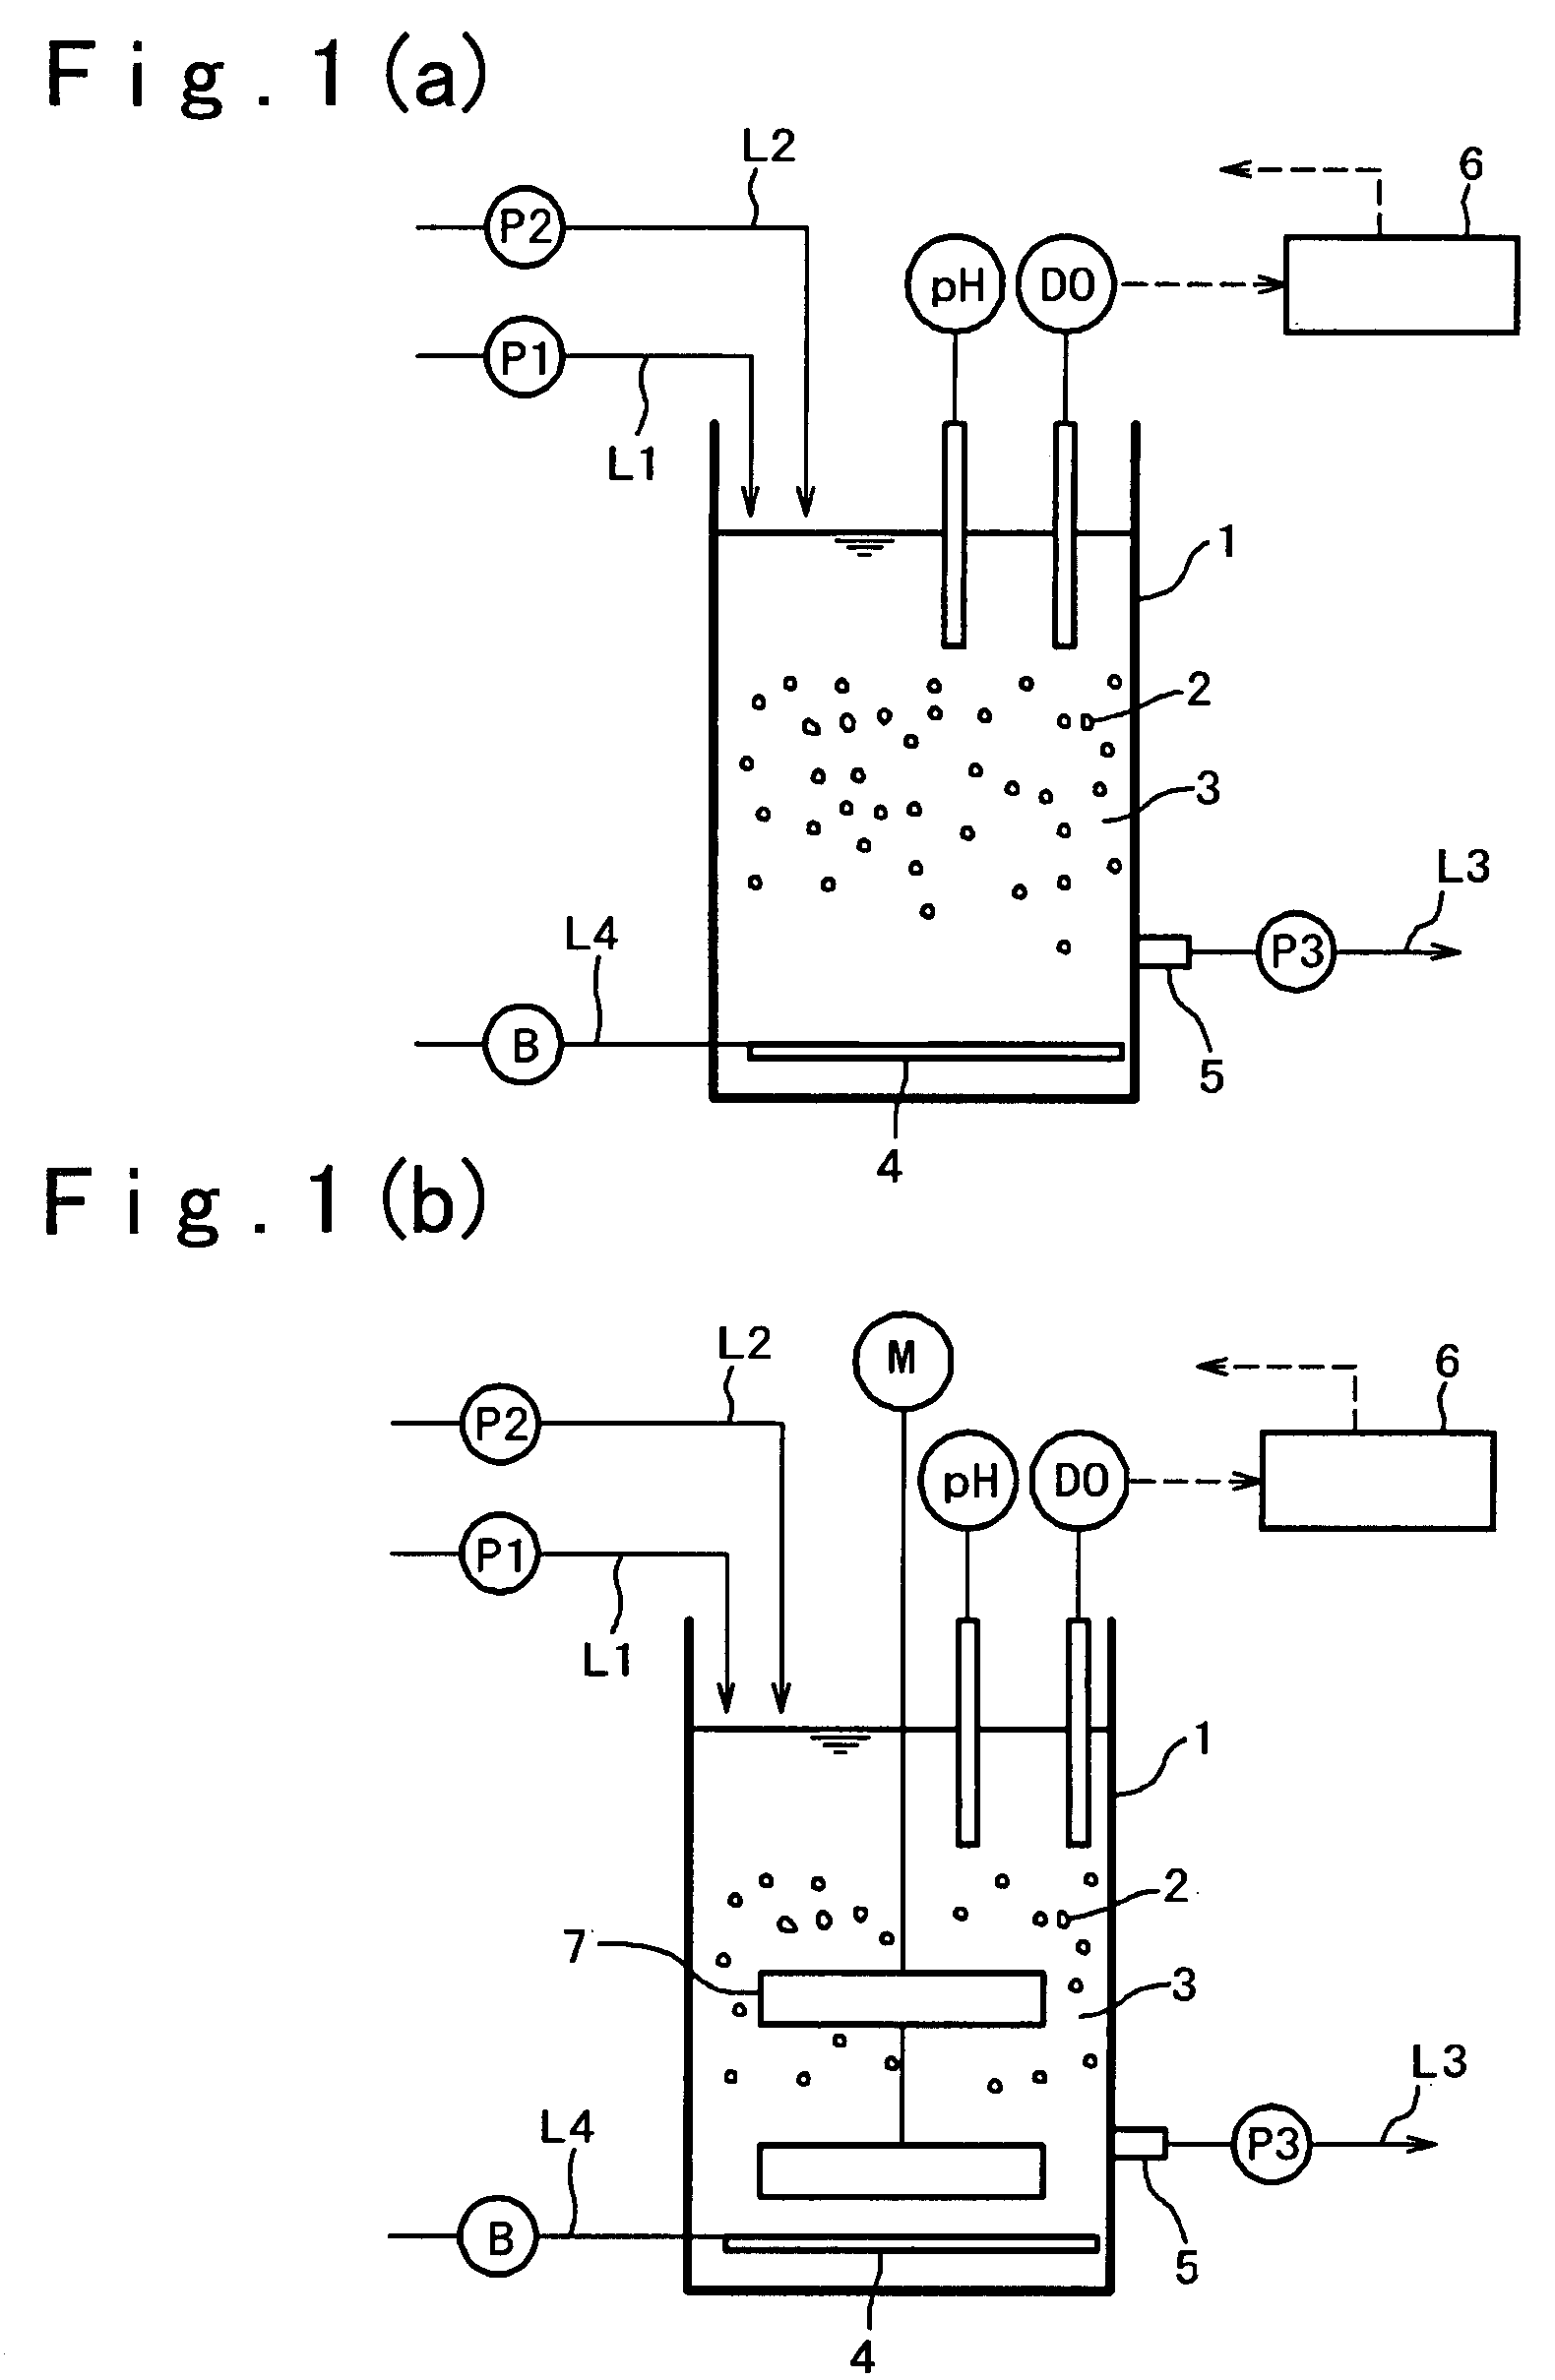 Process and Apparatus for Treating Nitrogeneous Liquor